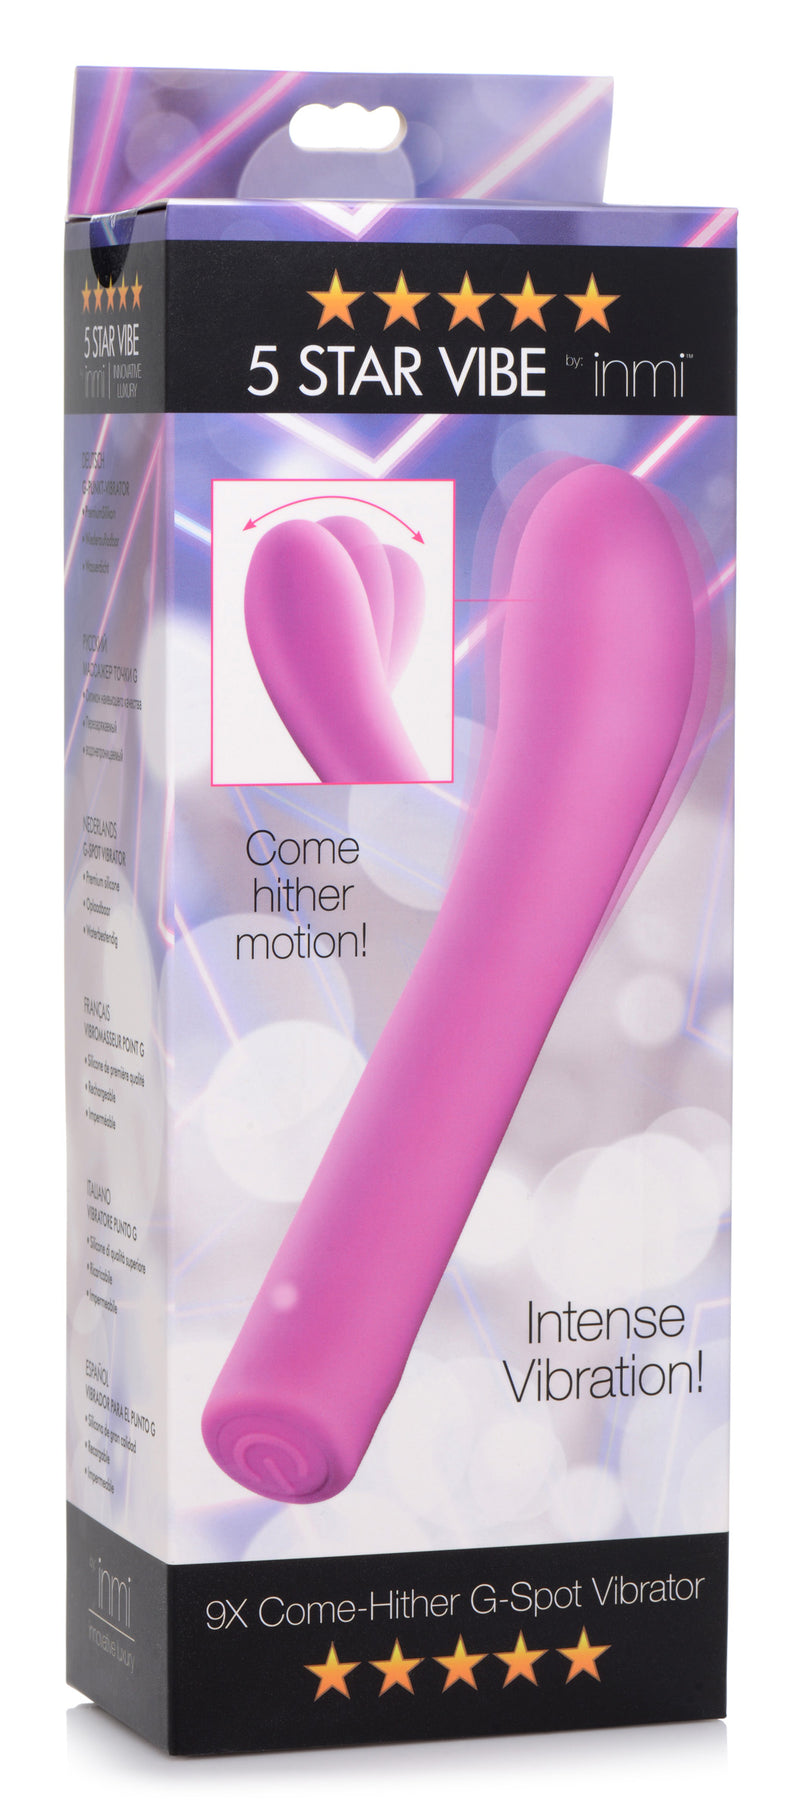 5 Star 9X Come-Hither G-Spot Silicone Vibrator - Pink vibesextoys from Inmi